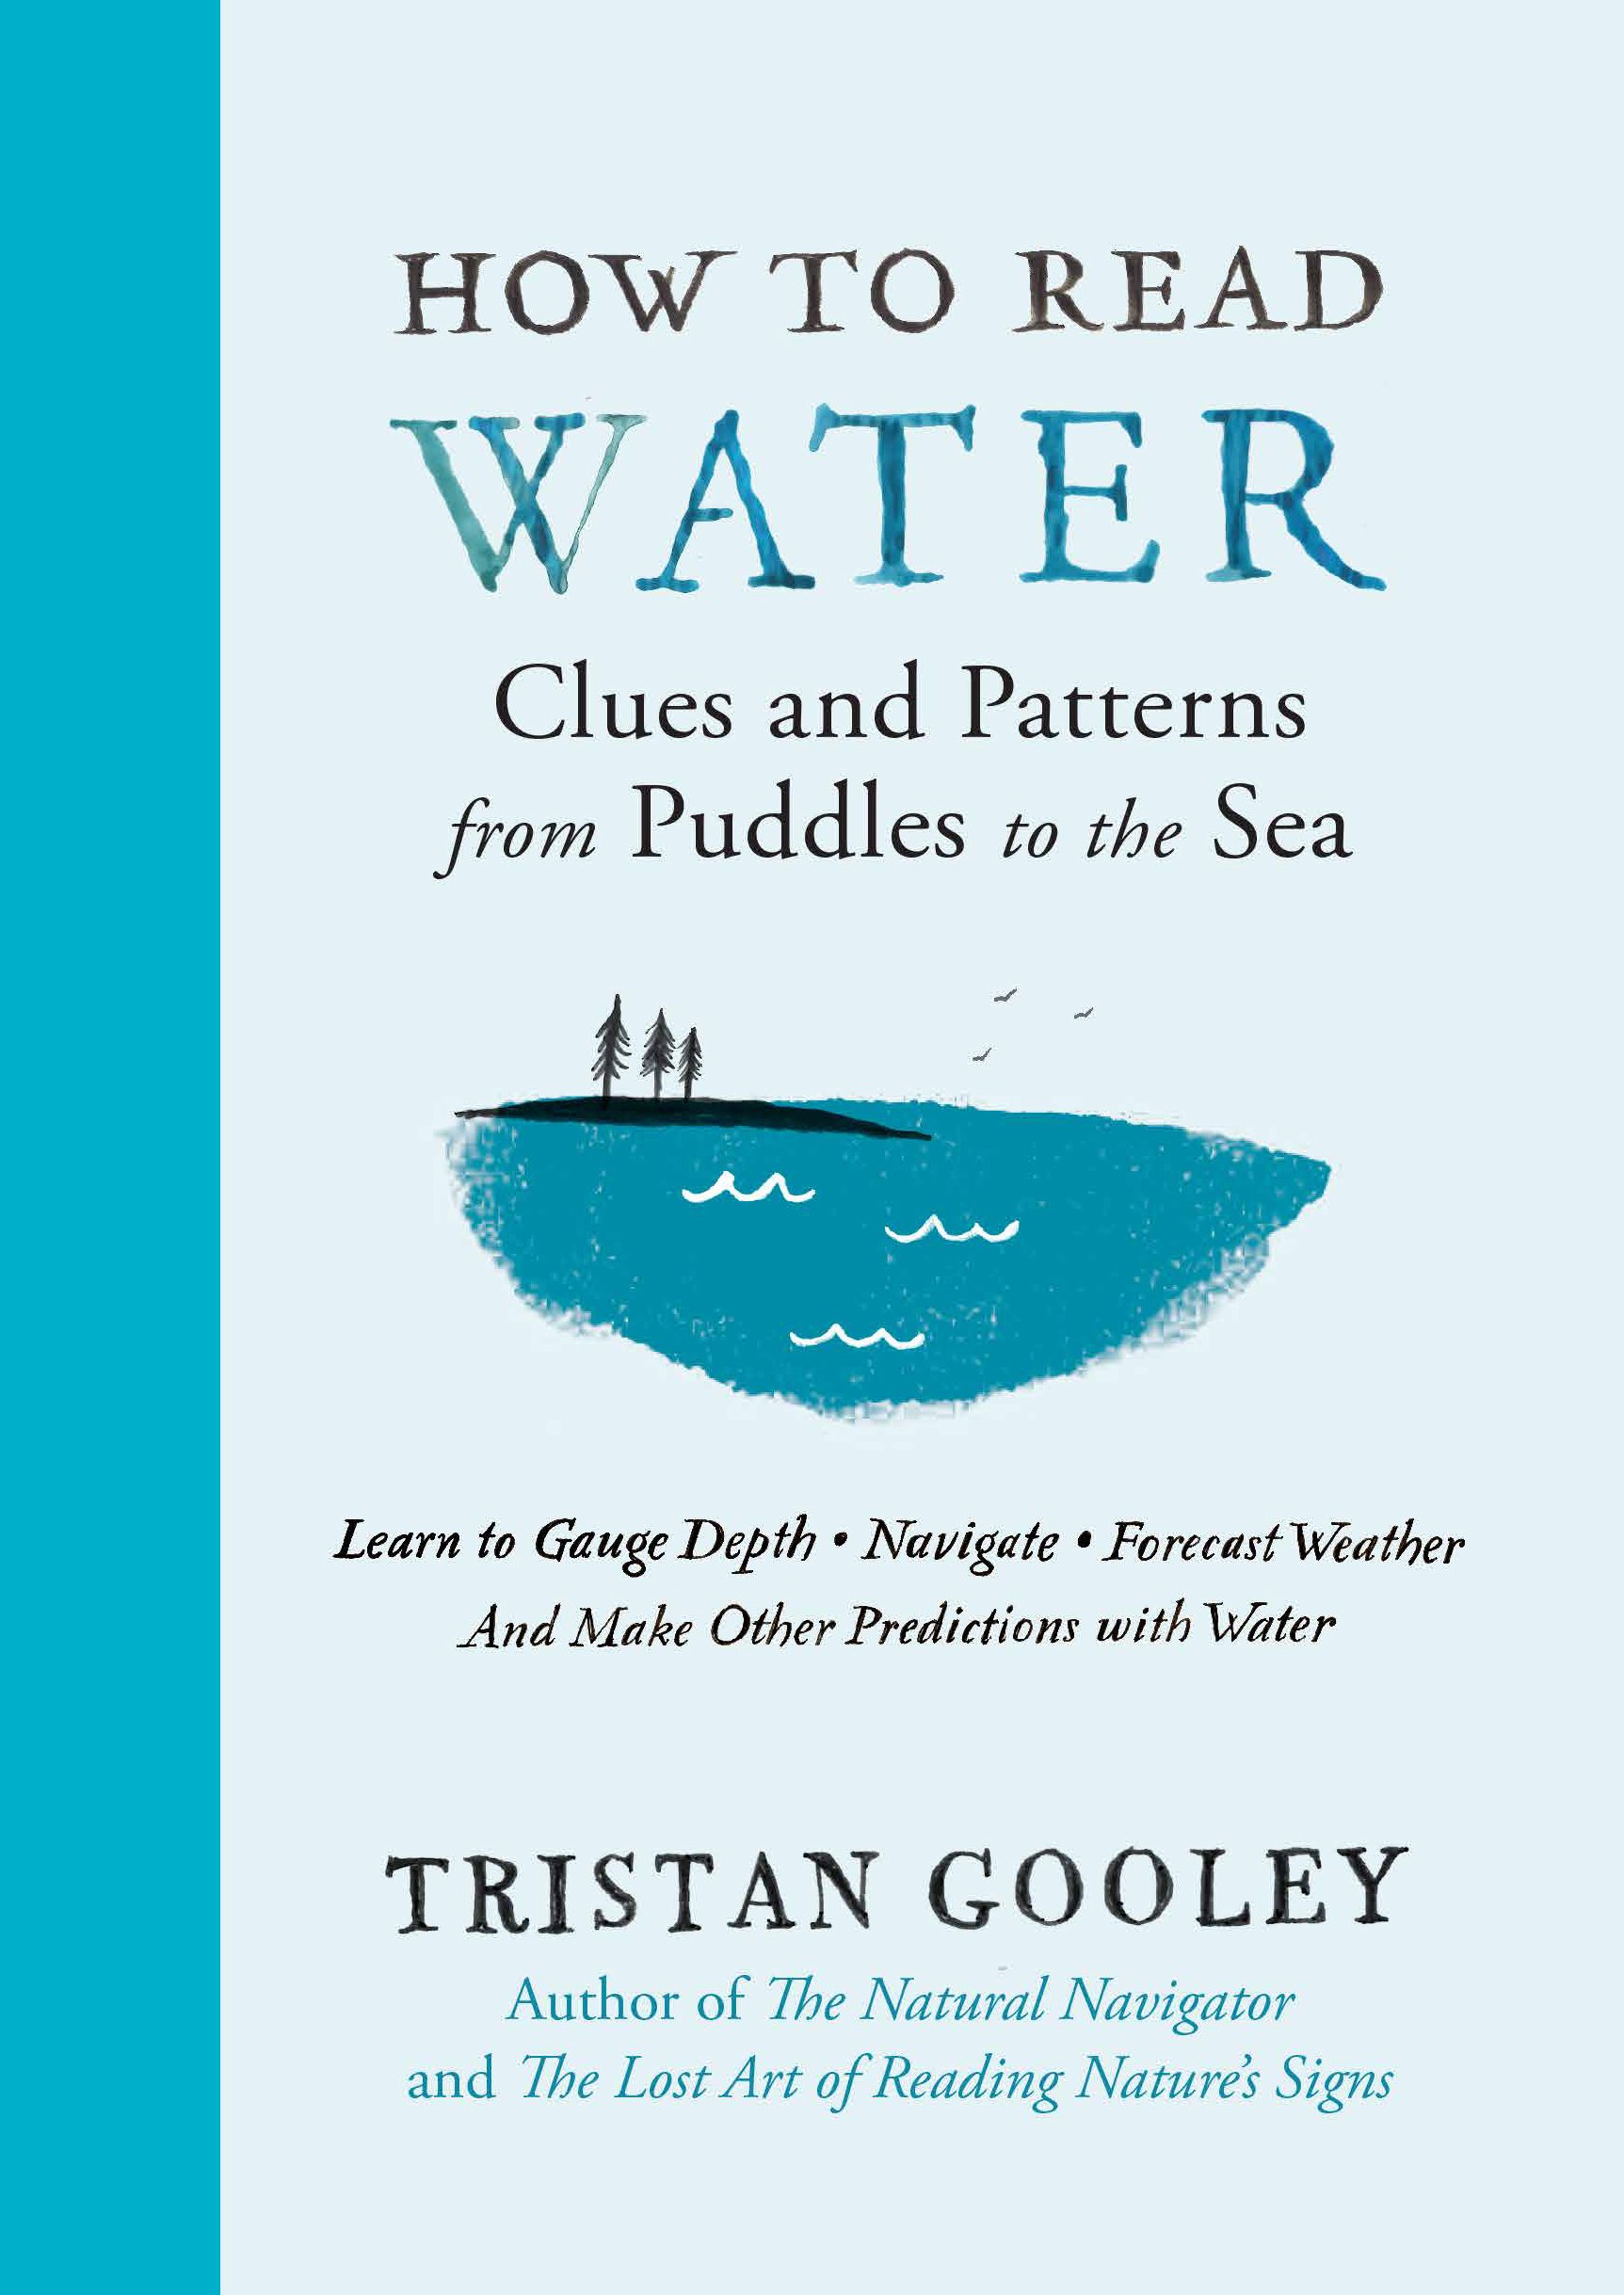 Tristan Gooley: How to read water (2016)